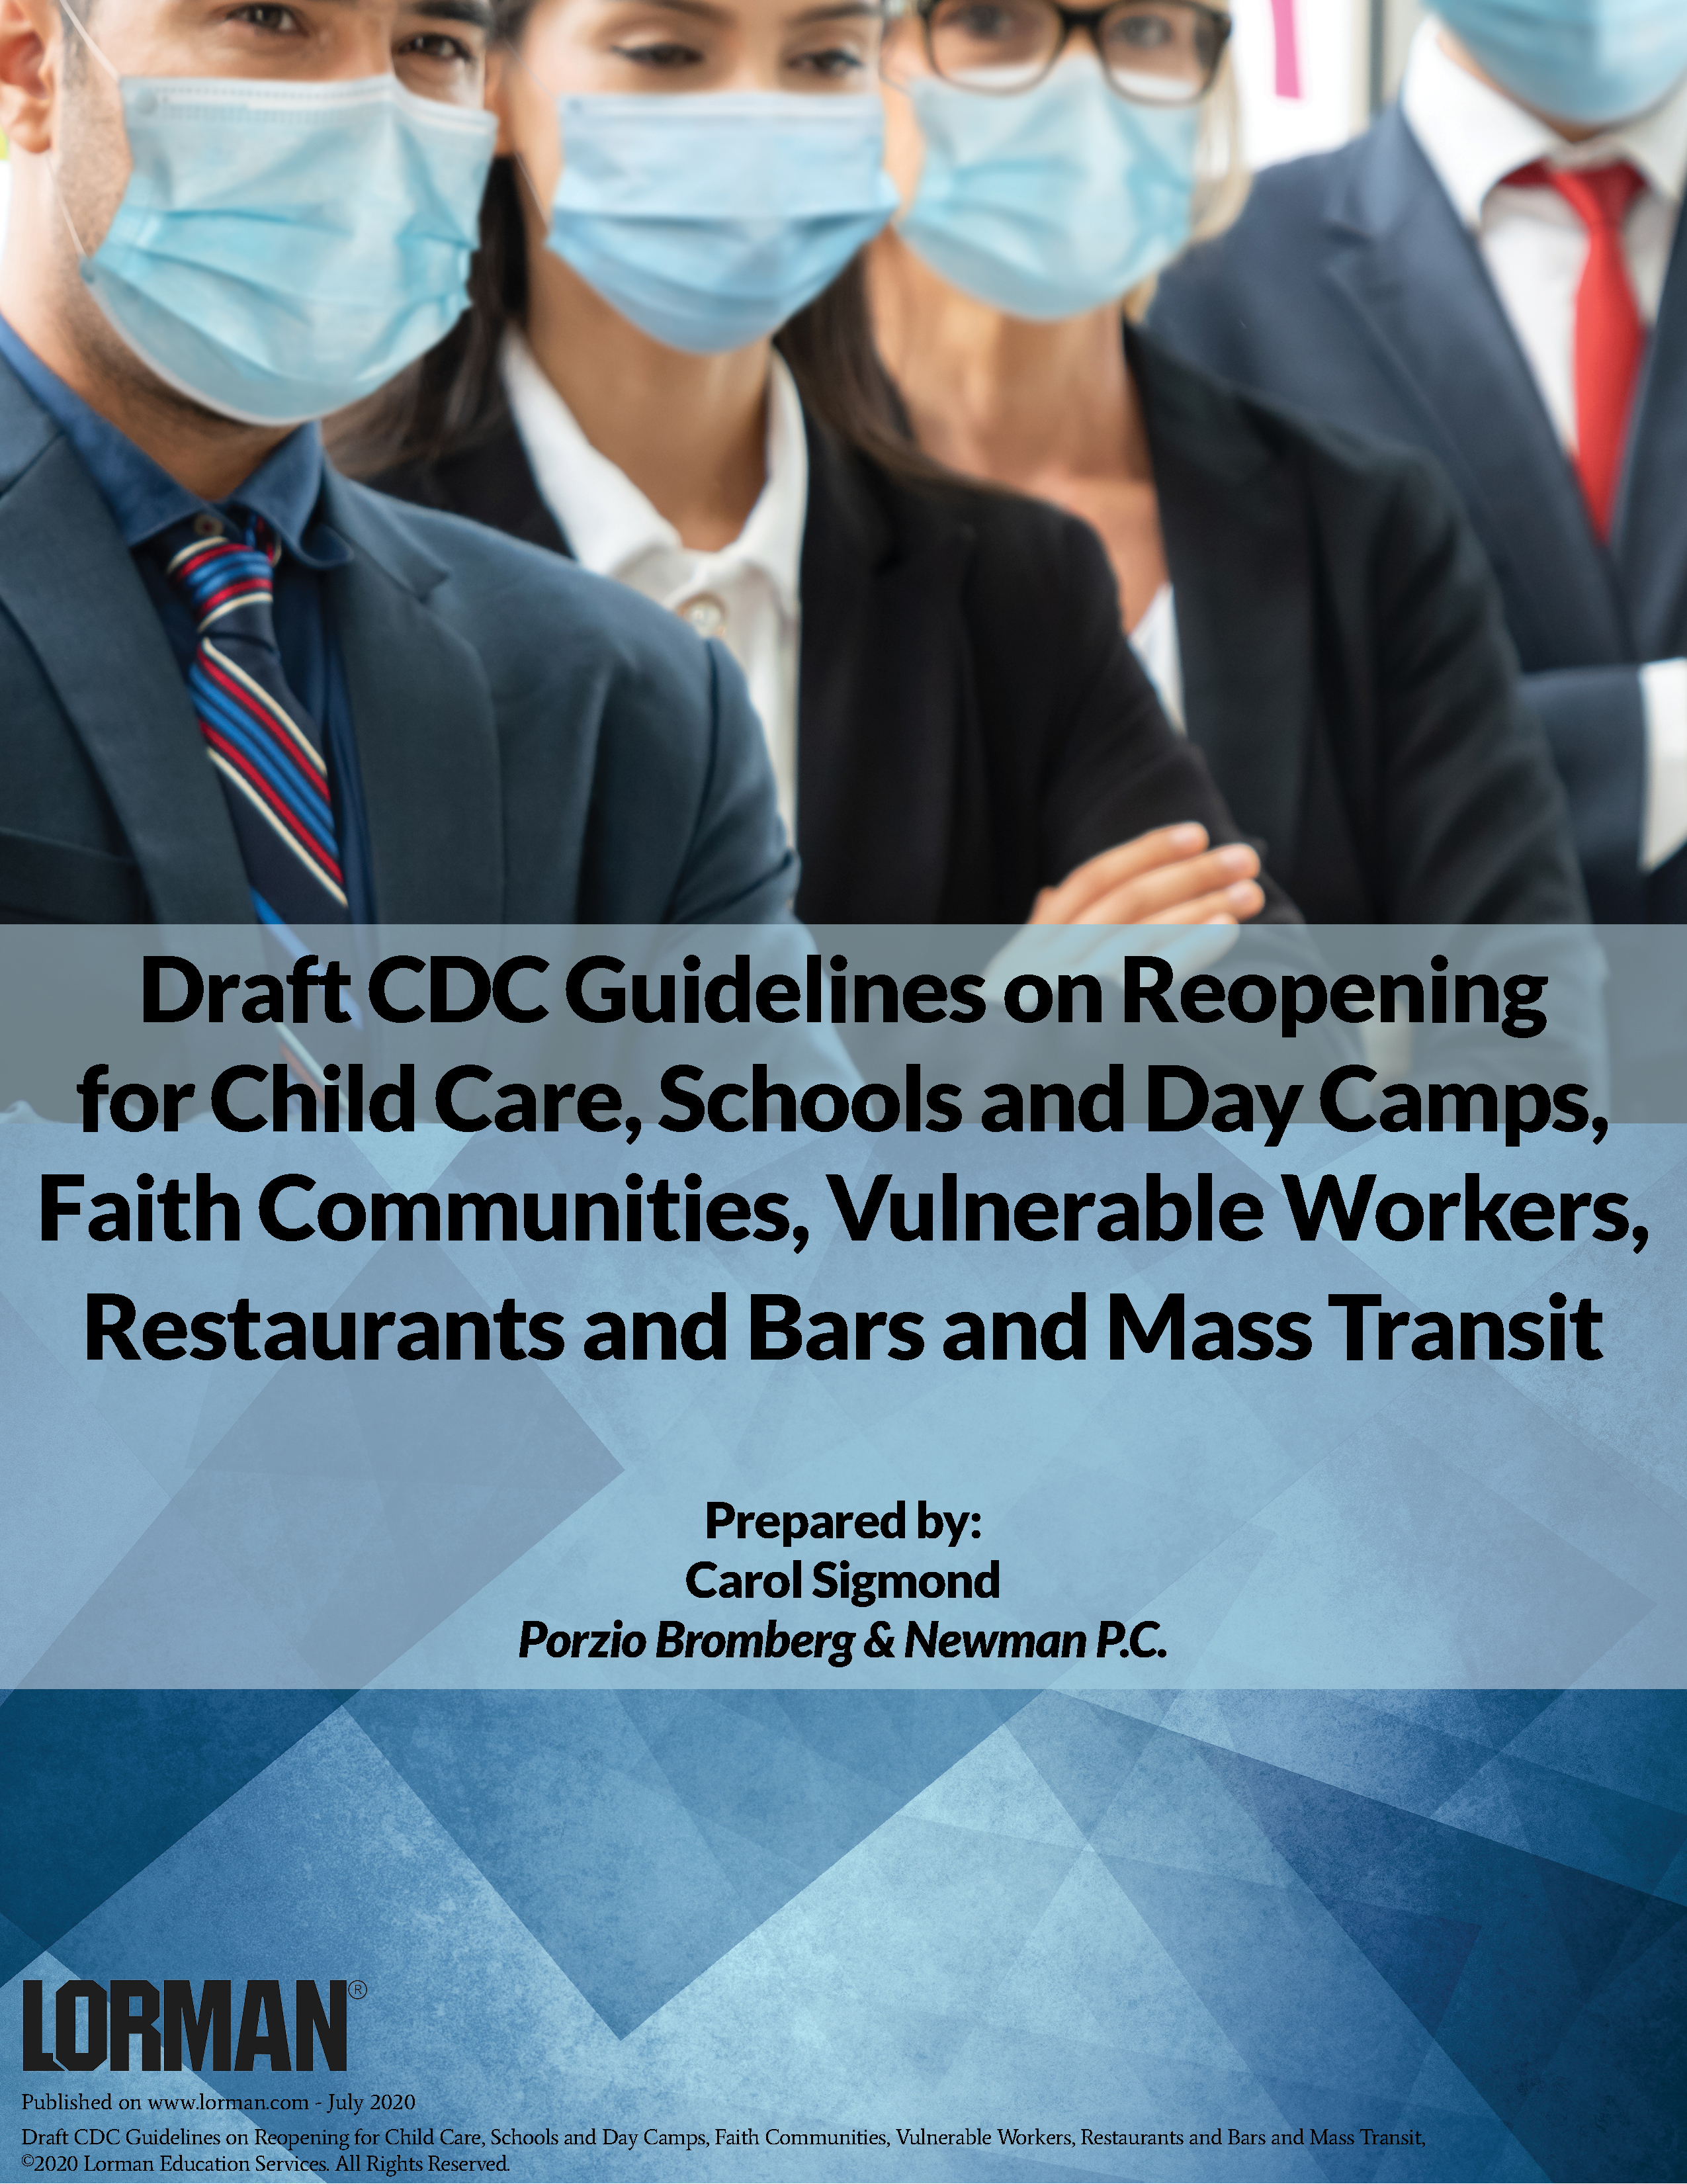 Draft CDC Guidelines on Reopening for Child Care, Schools and Day Camps